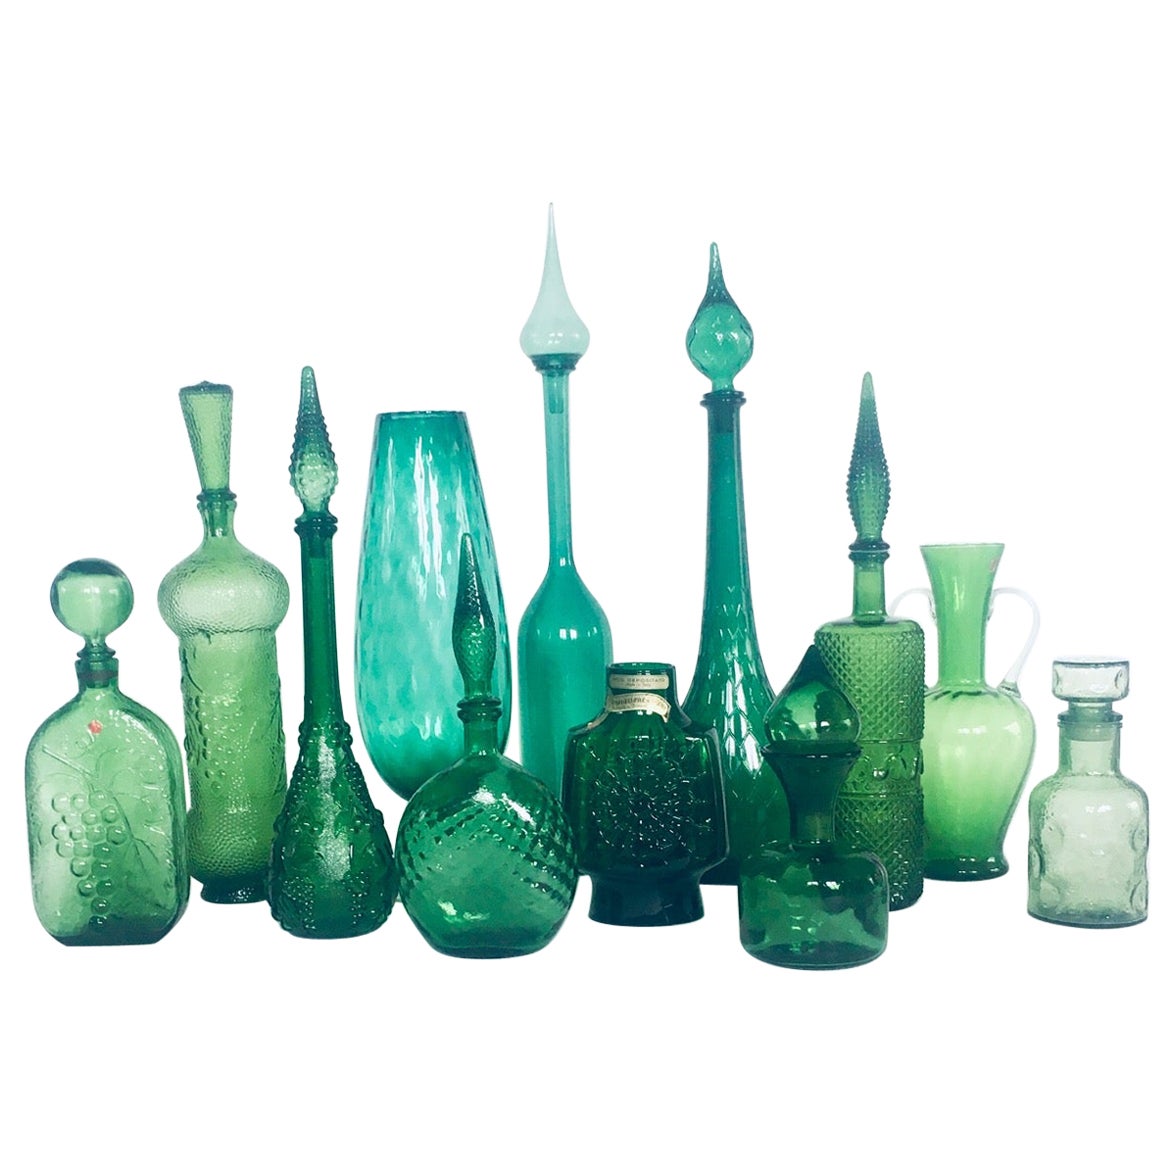 1960's Collection of Vintage Green Glass Vases & Decanters, Set of 12 For Sale